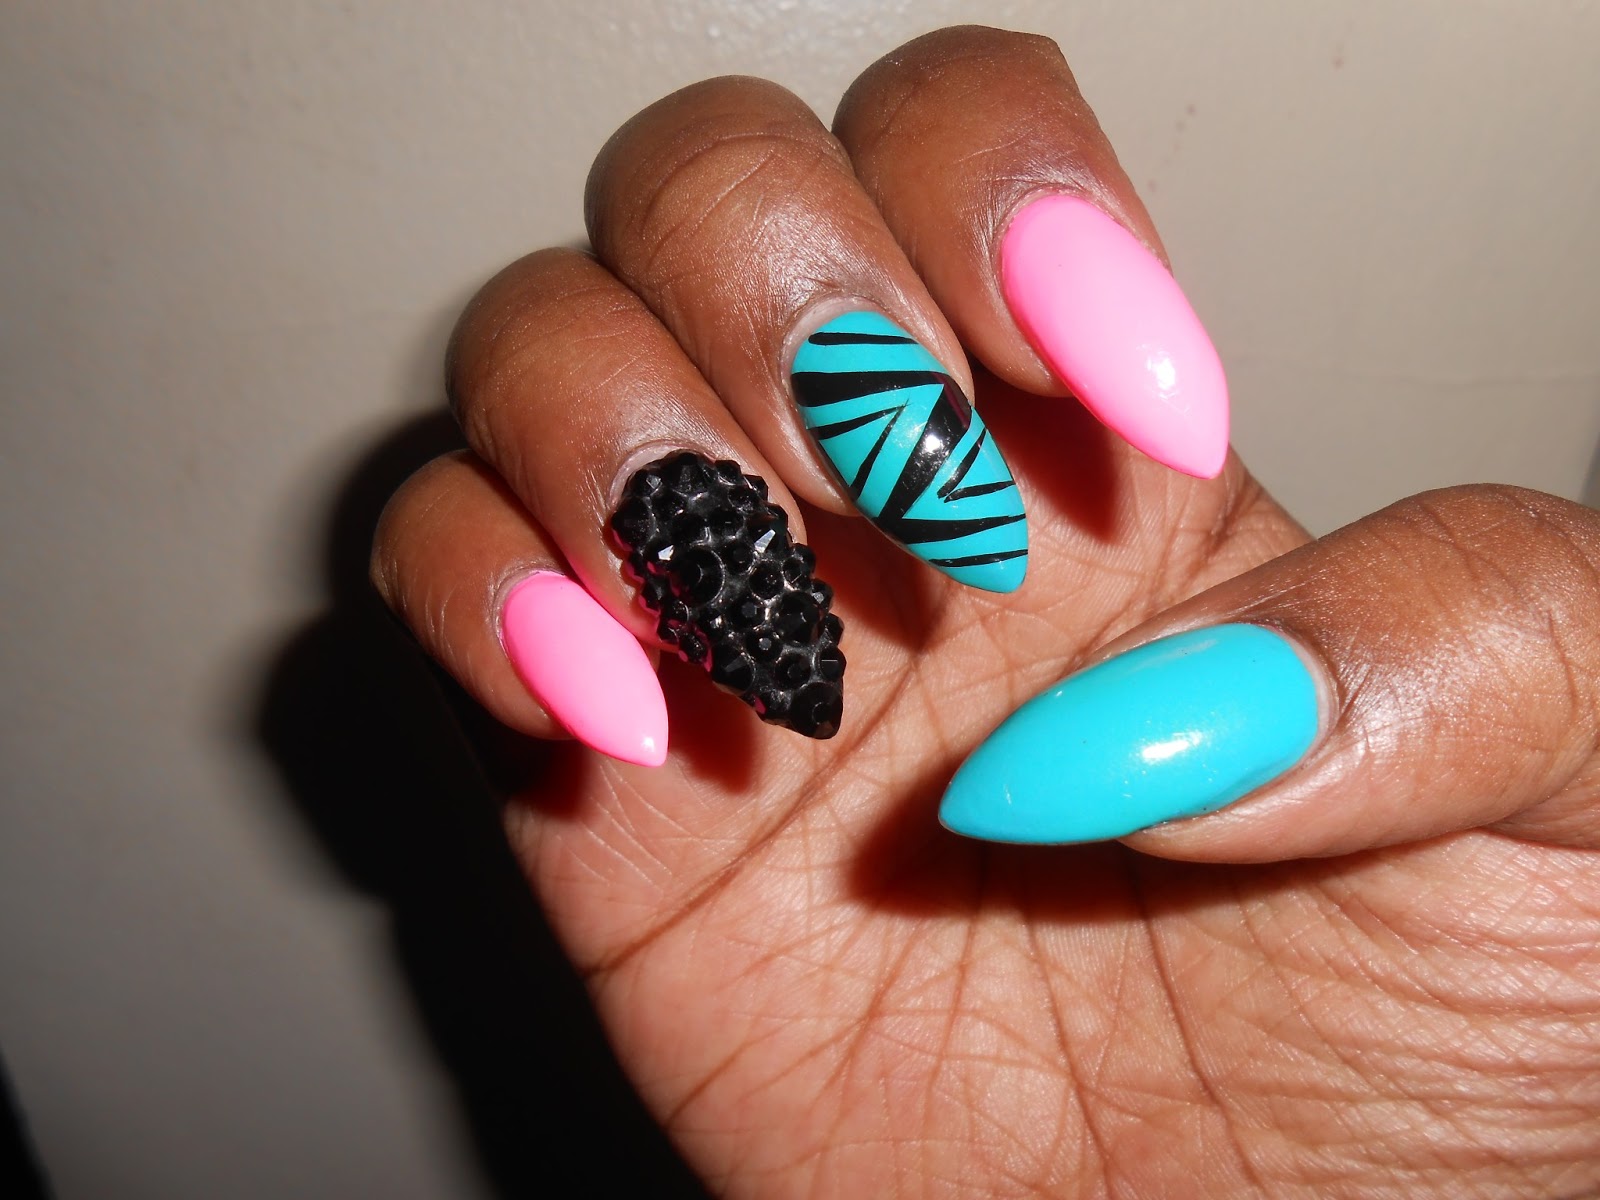 2. "Cute Stiletto Nail Designs for Every Occasion" - wide 2